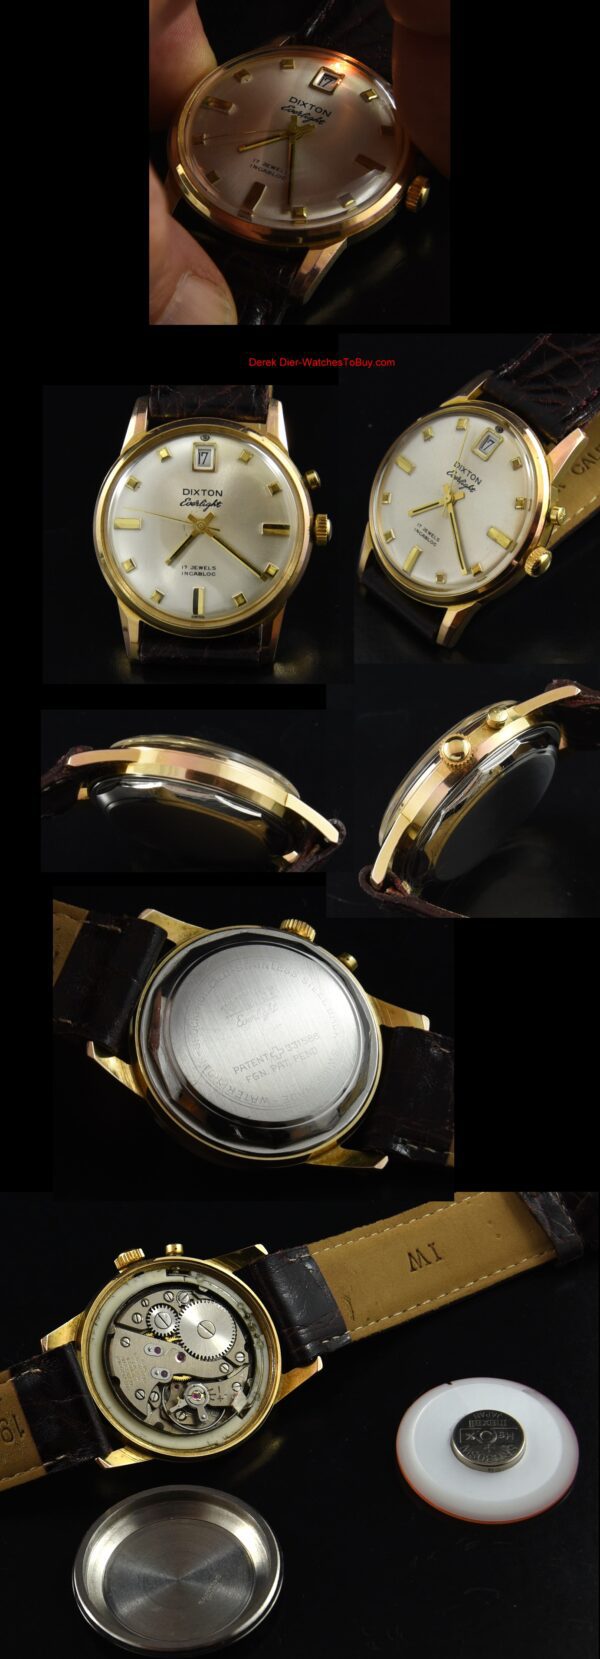 1960s Dixton Everlight gold-plated Swiss-made watch with original light bulb, case, steel back, and clean, accurate manual winding movement.